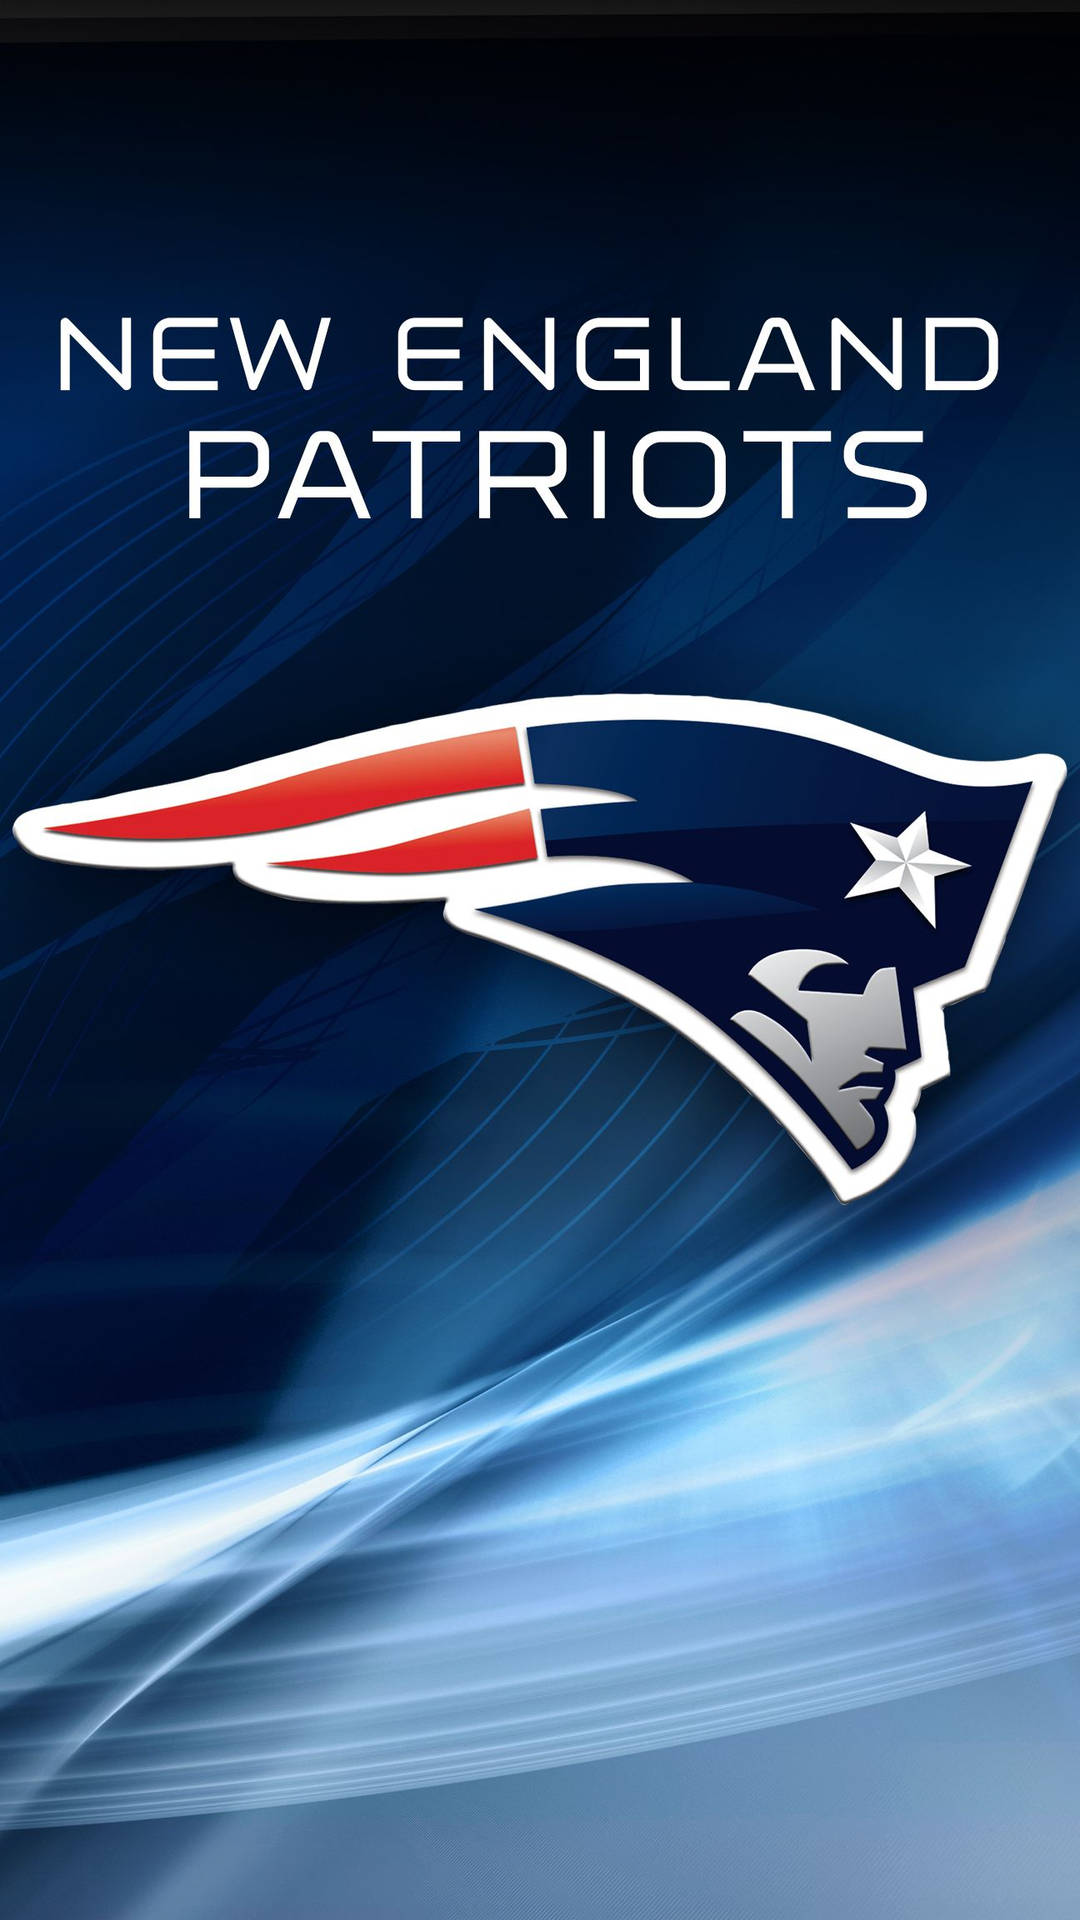 A proud moment for America with the Awesome Patriots Wallpaper